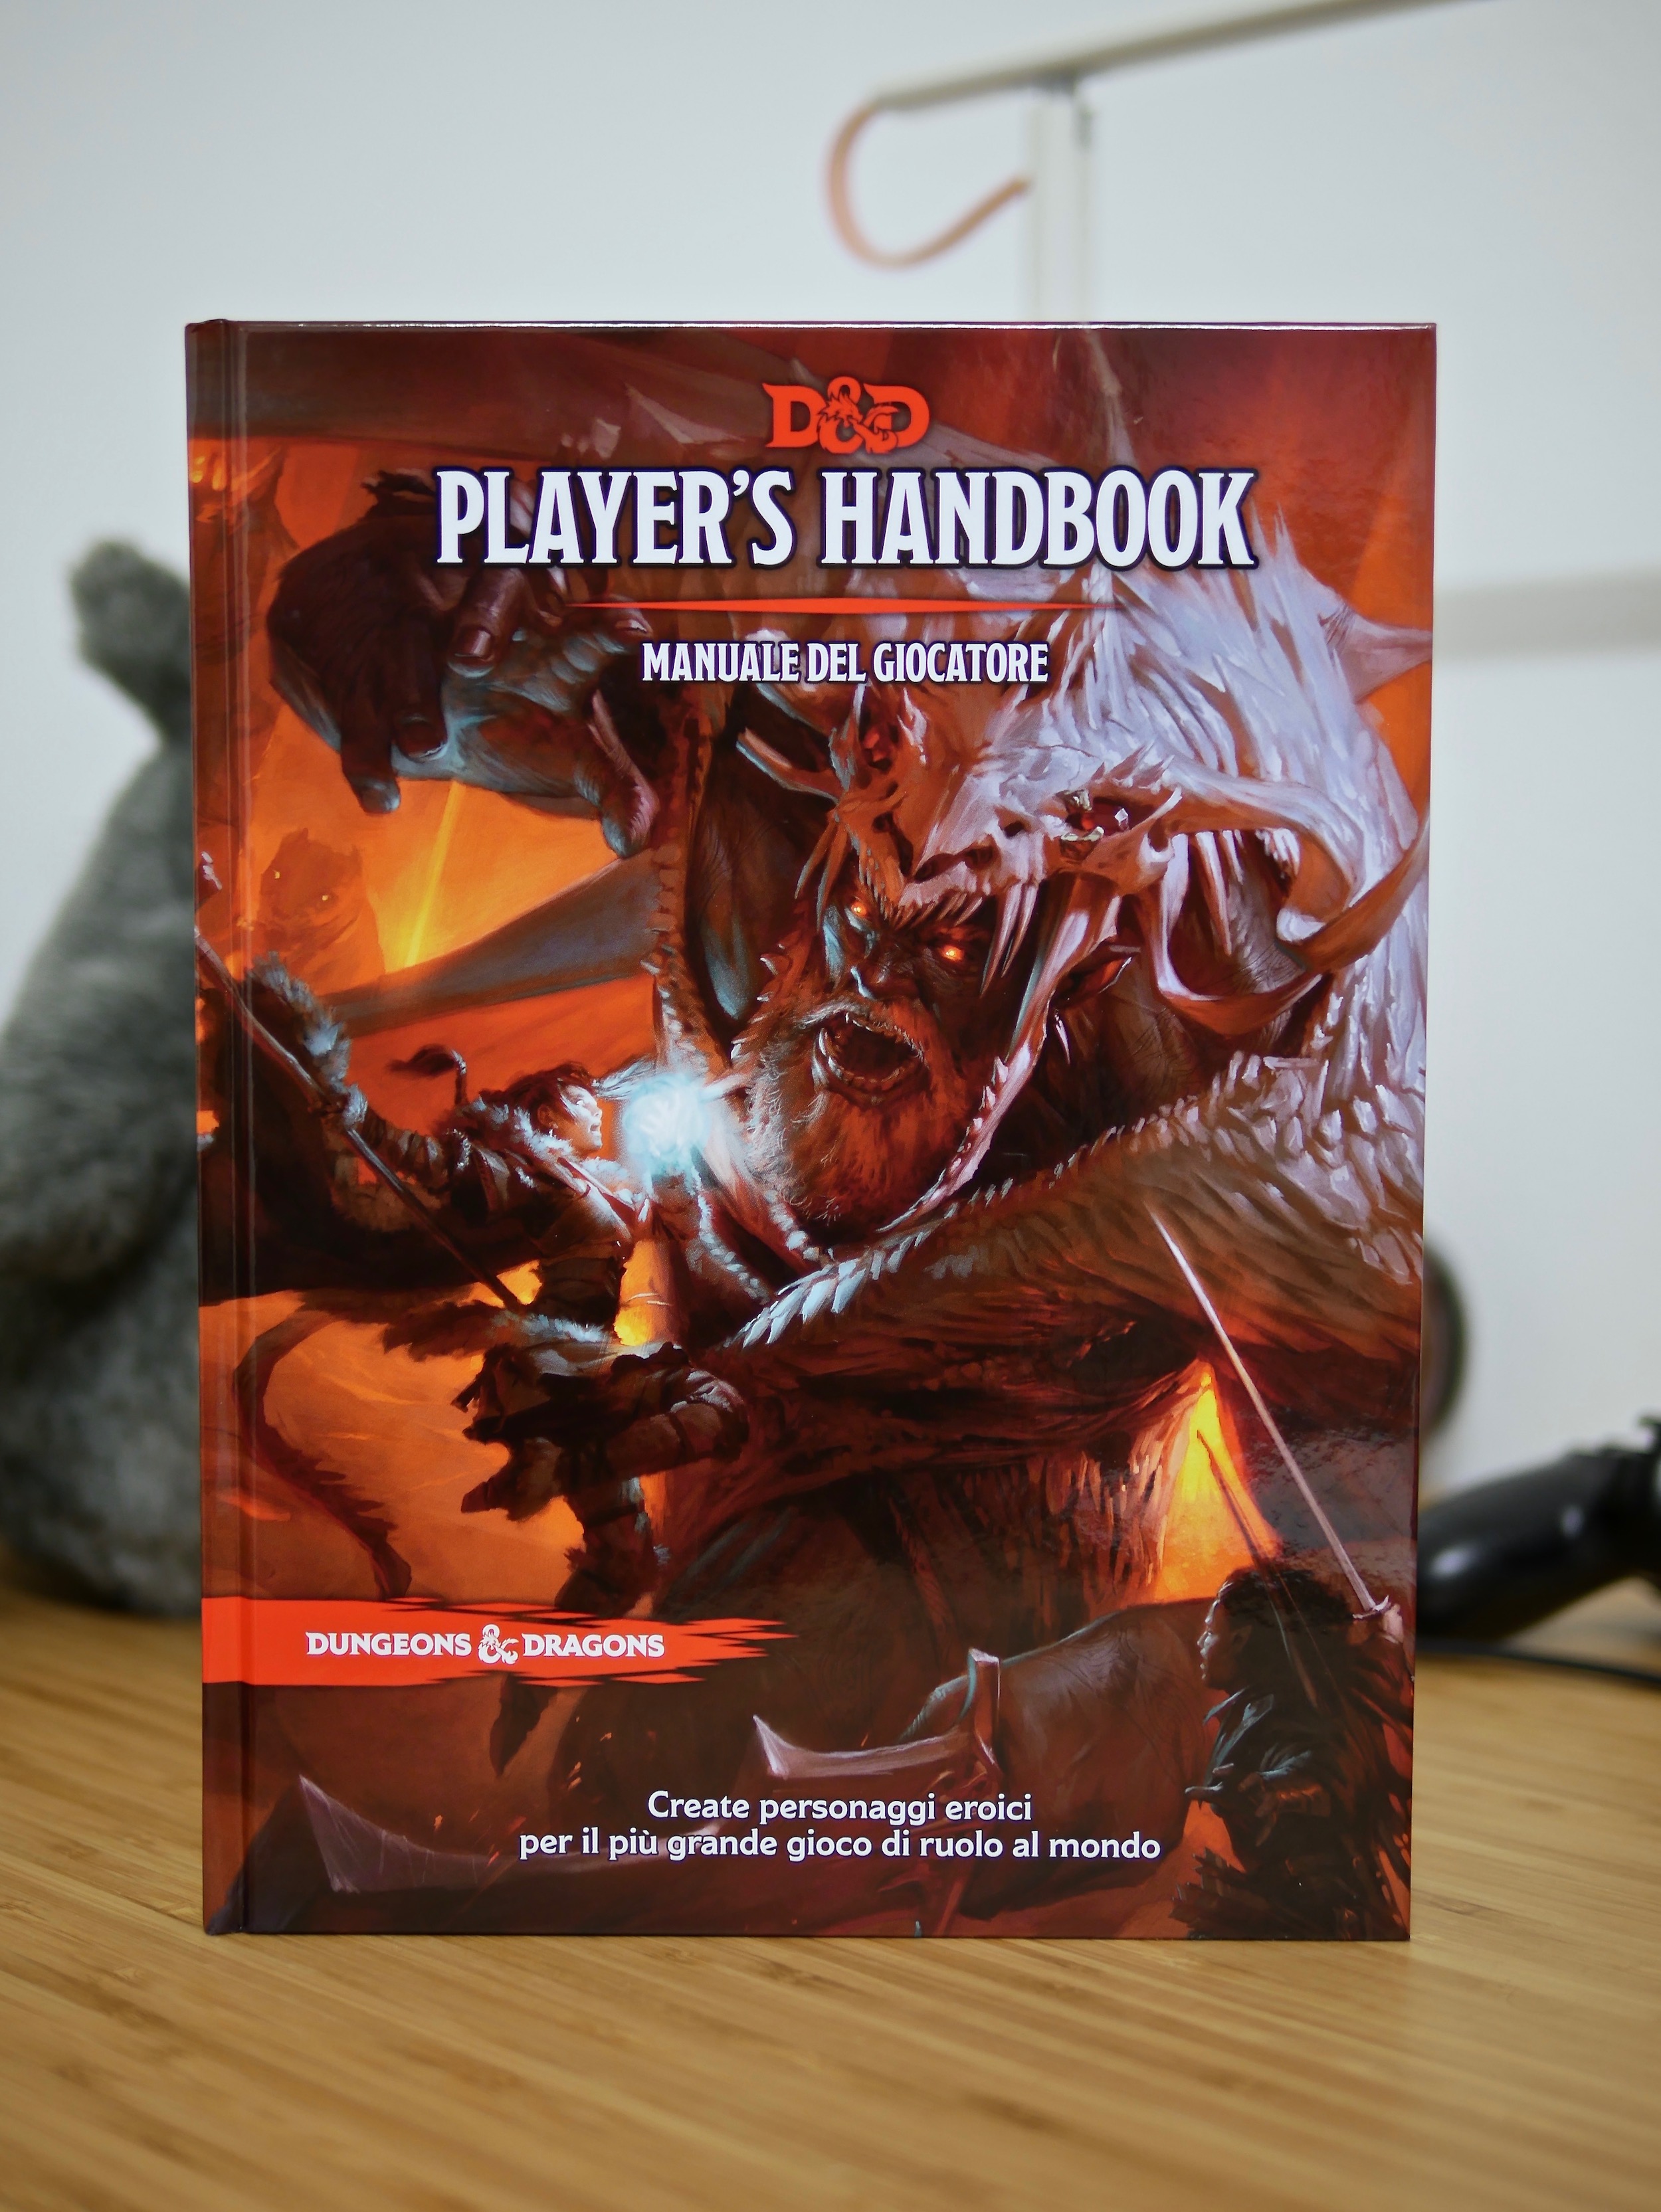 Dungeons & Dragons 5.0 arriva anche in italiano